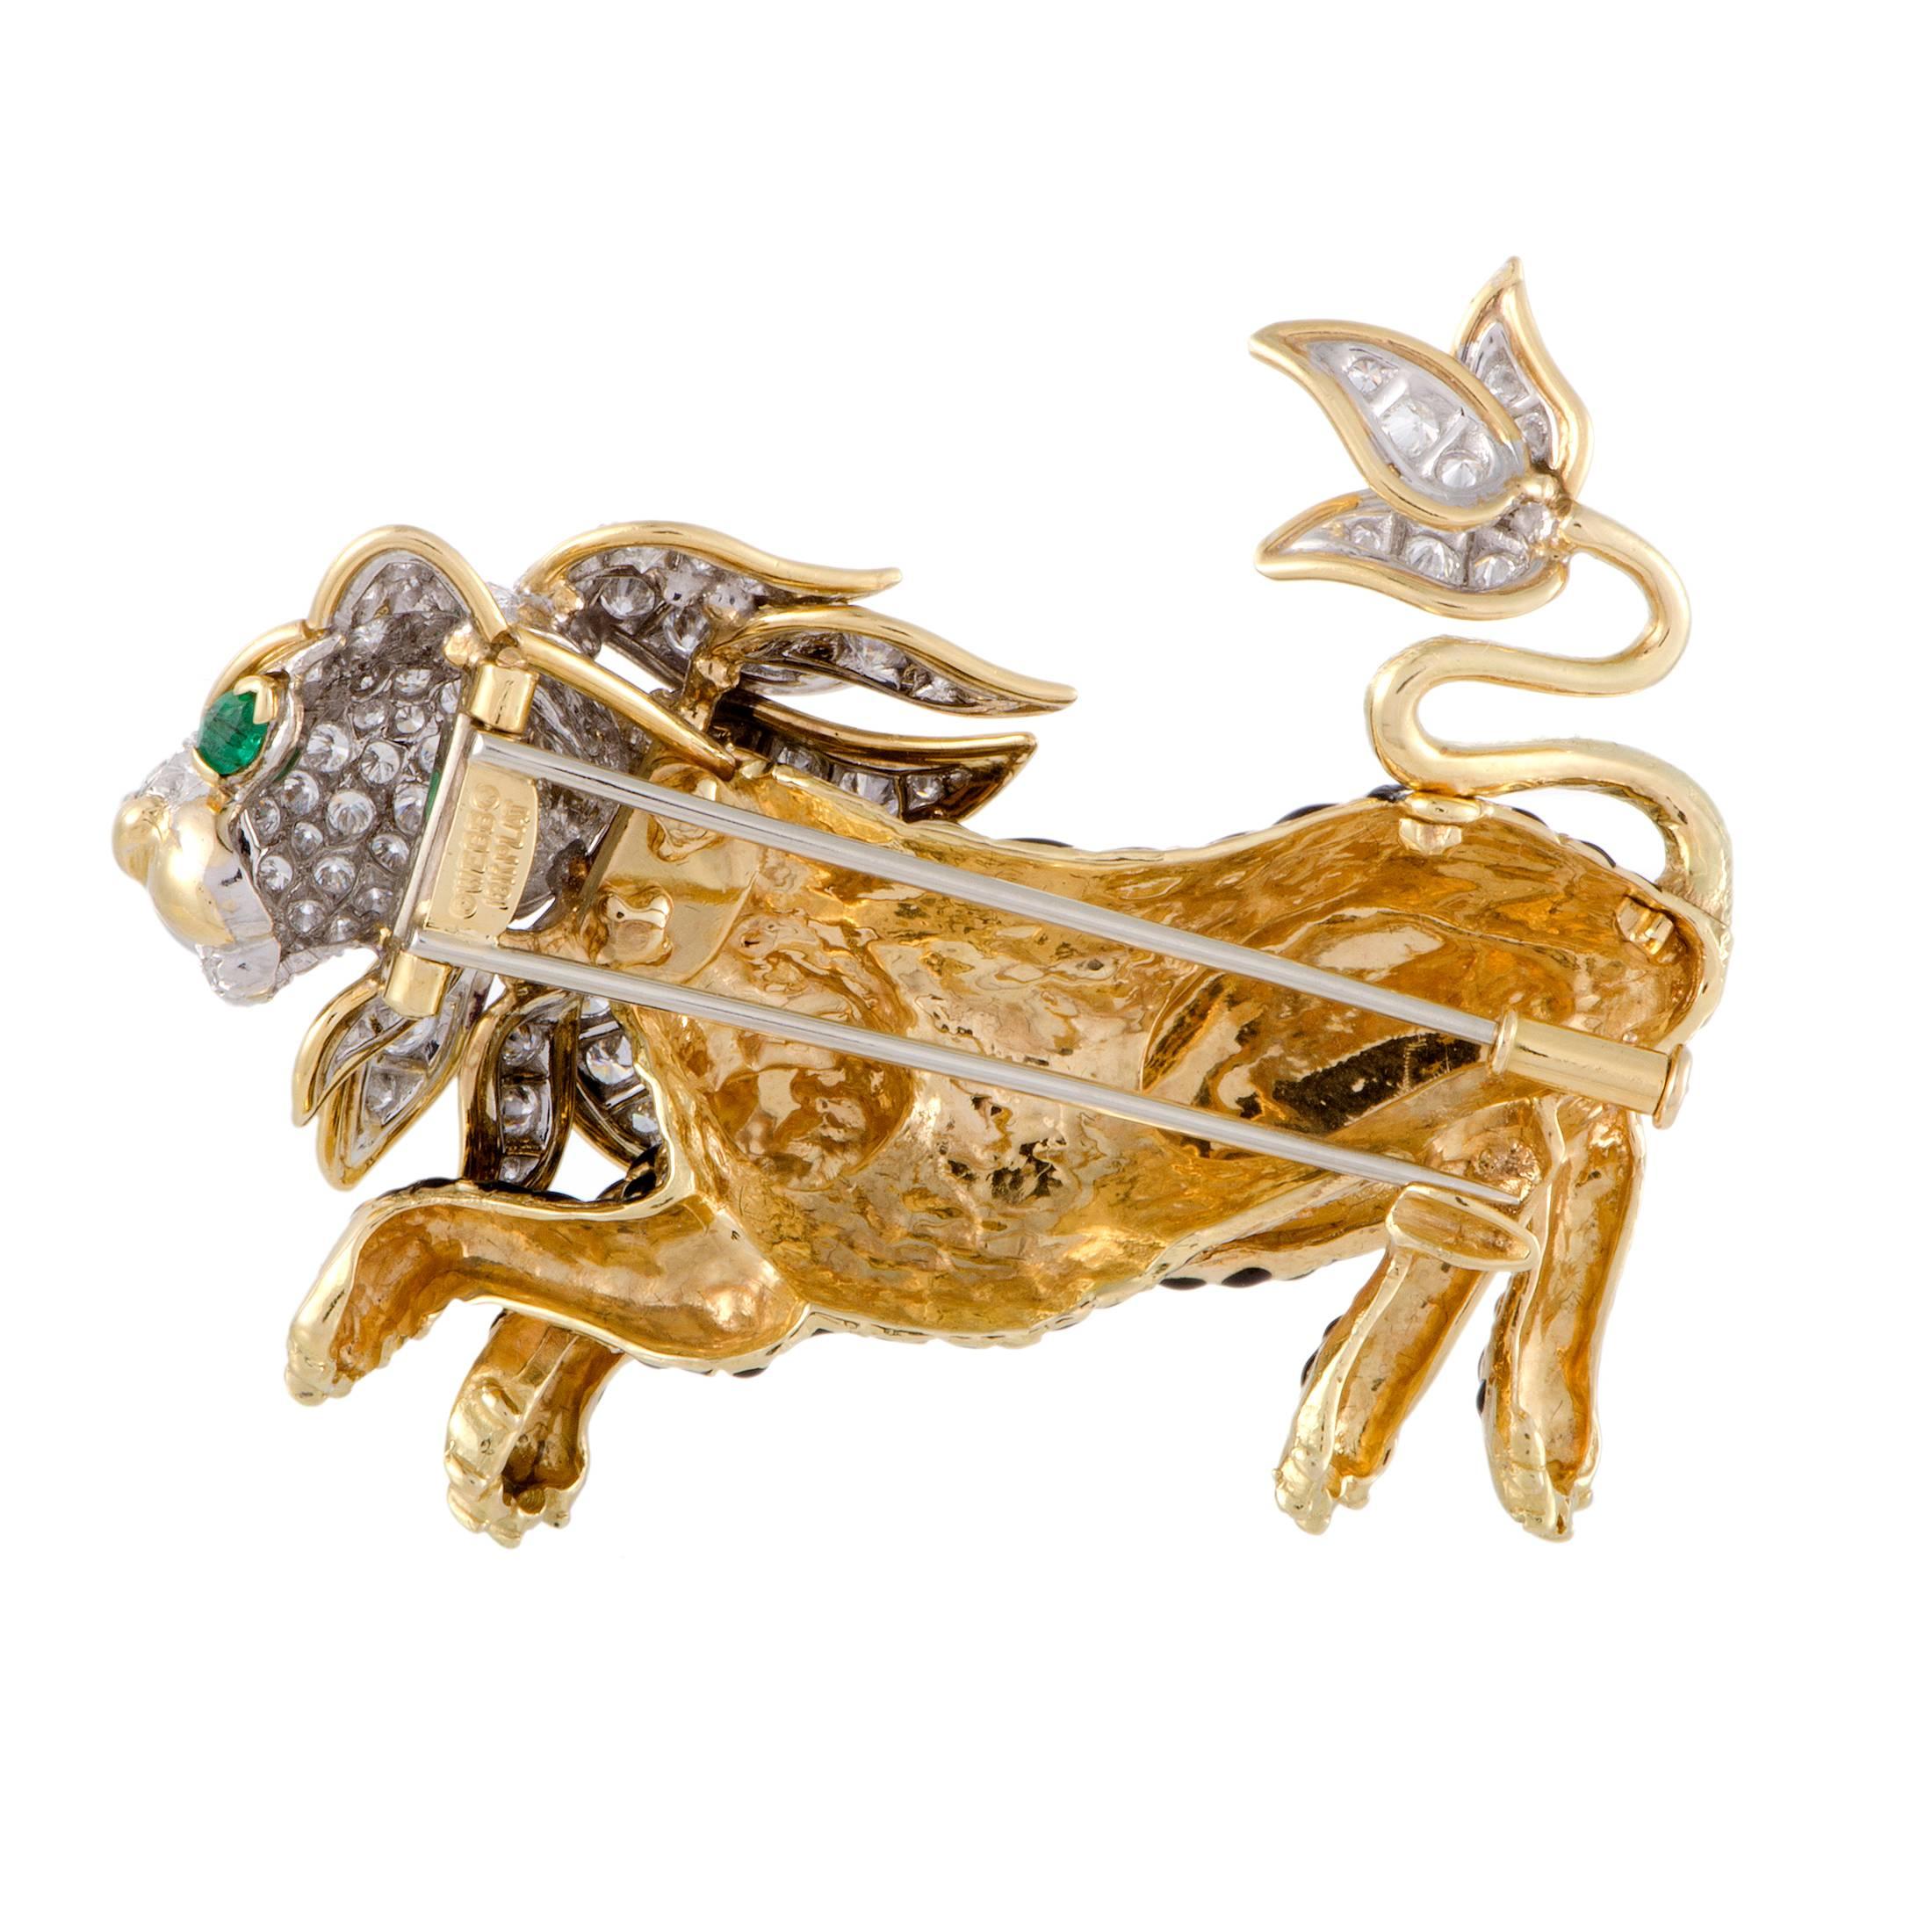 Take a walk on the wild side with this yellow and white gold Leopon brooch embellished with brilliant-cut diamonds and featuring glowing emerald eyes. Set in a playful pose with its tail in the air, this Leapon brooch exudes exotic vibes of two